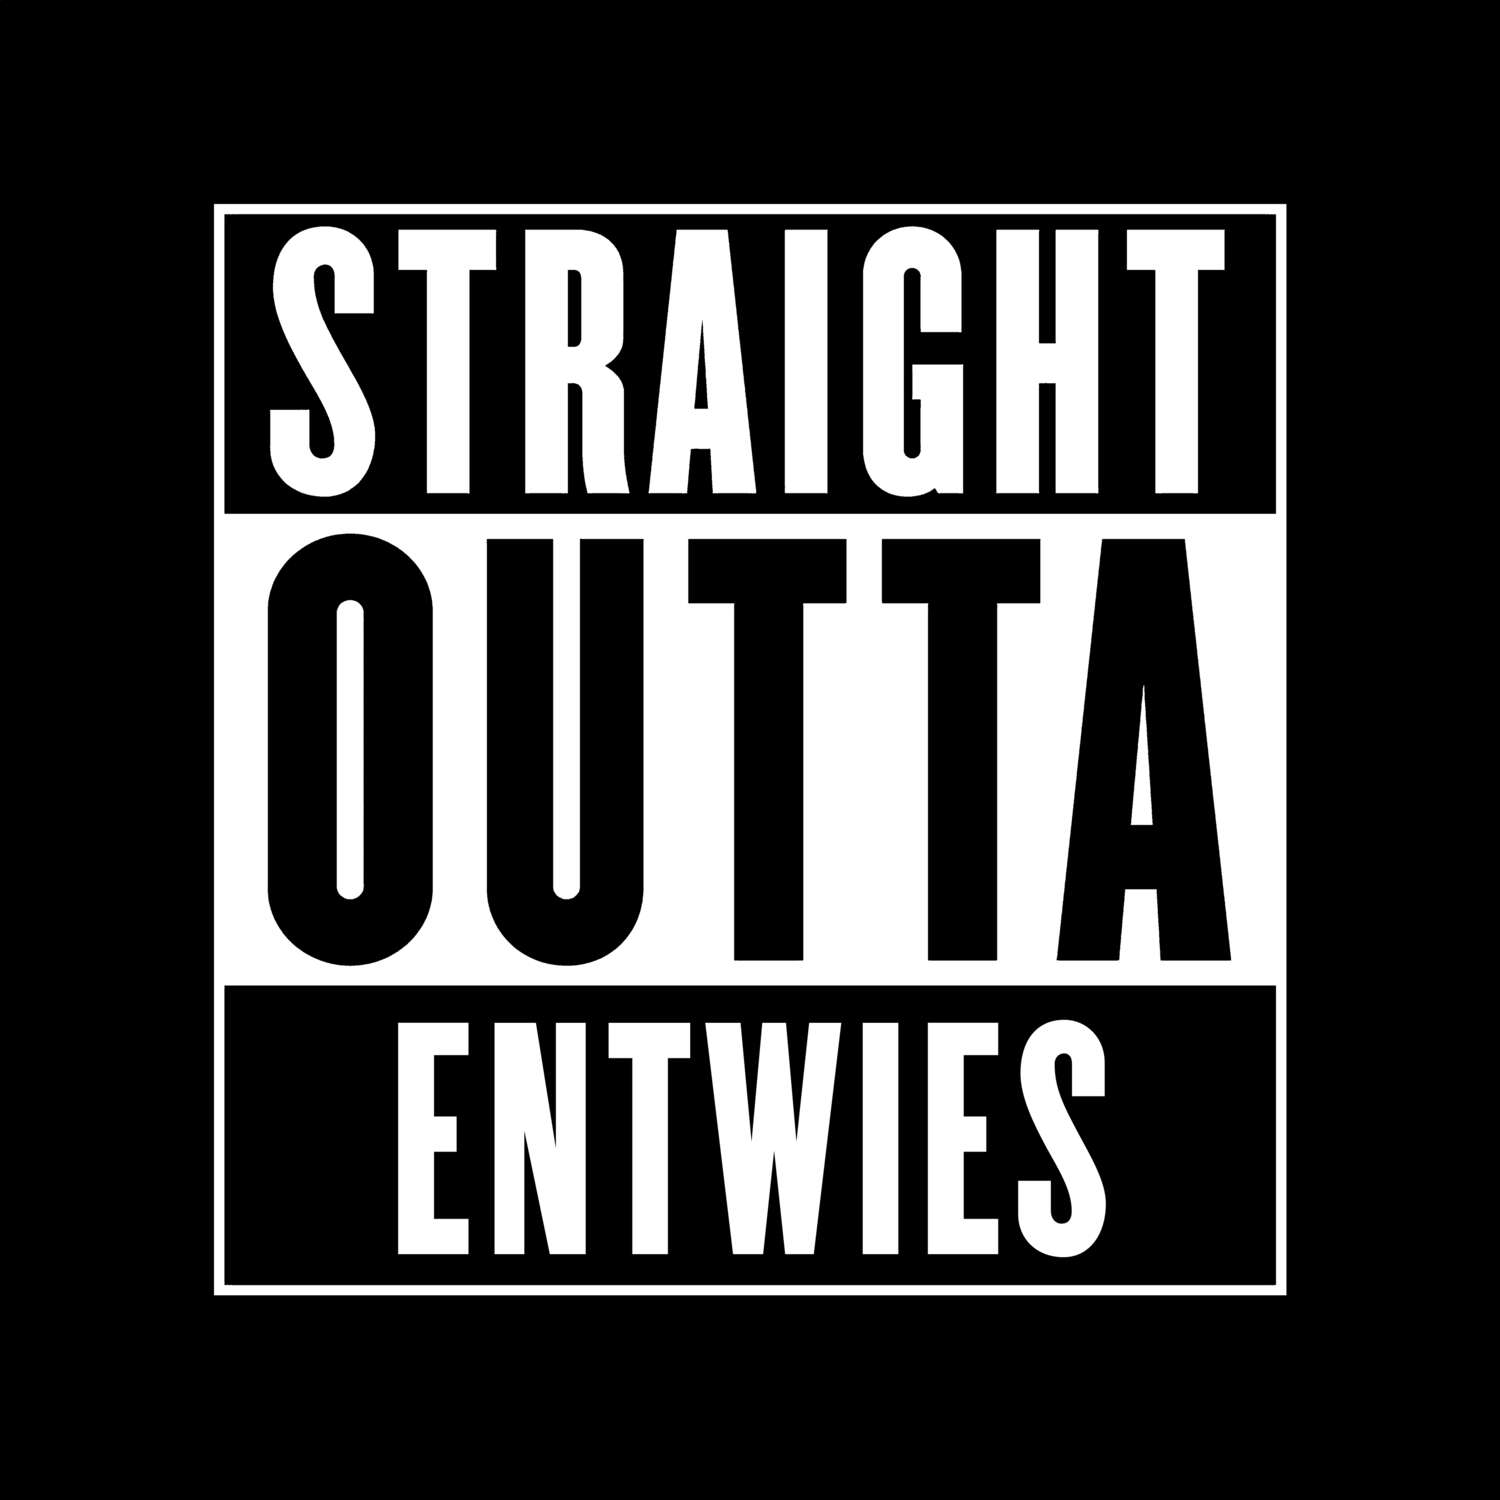 Entwies T-Shirt »Straight Outta«